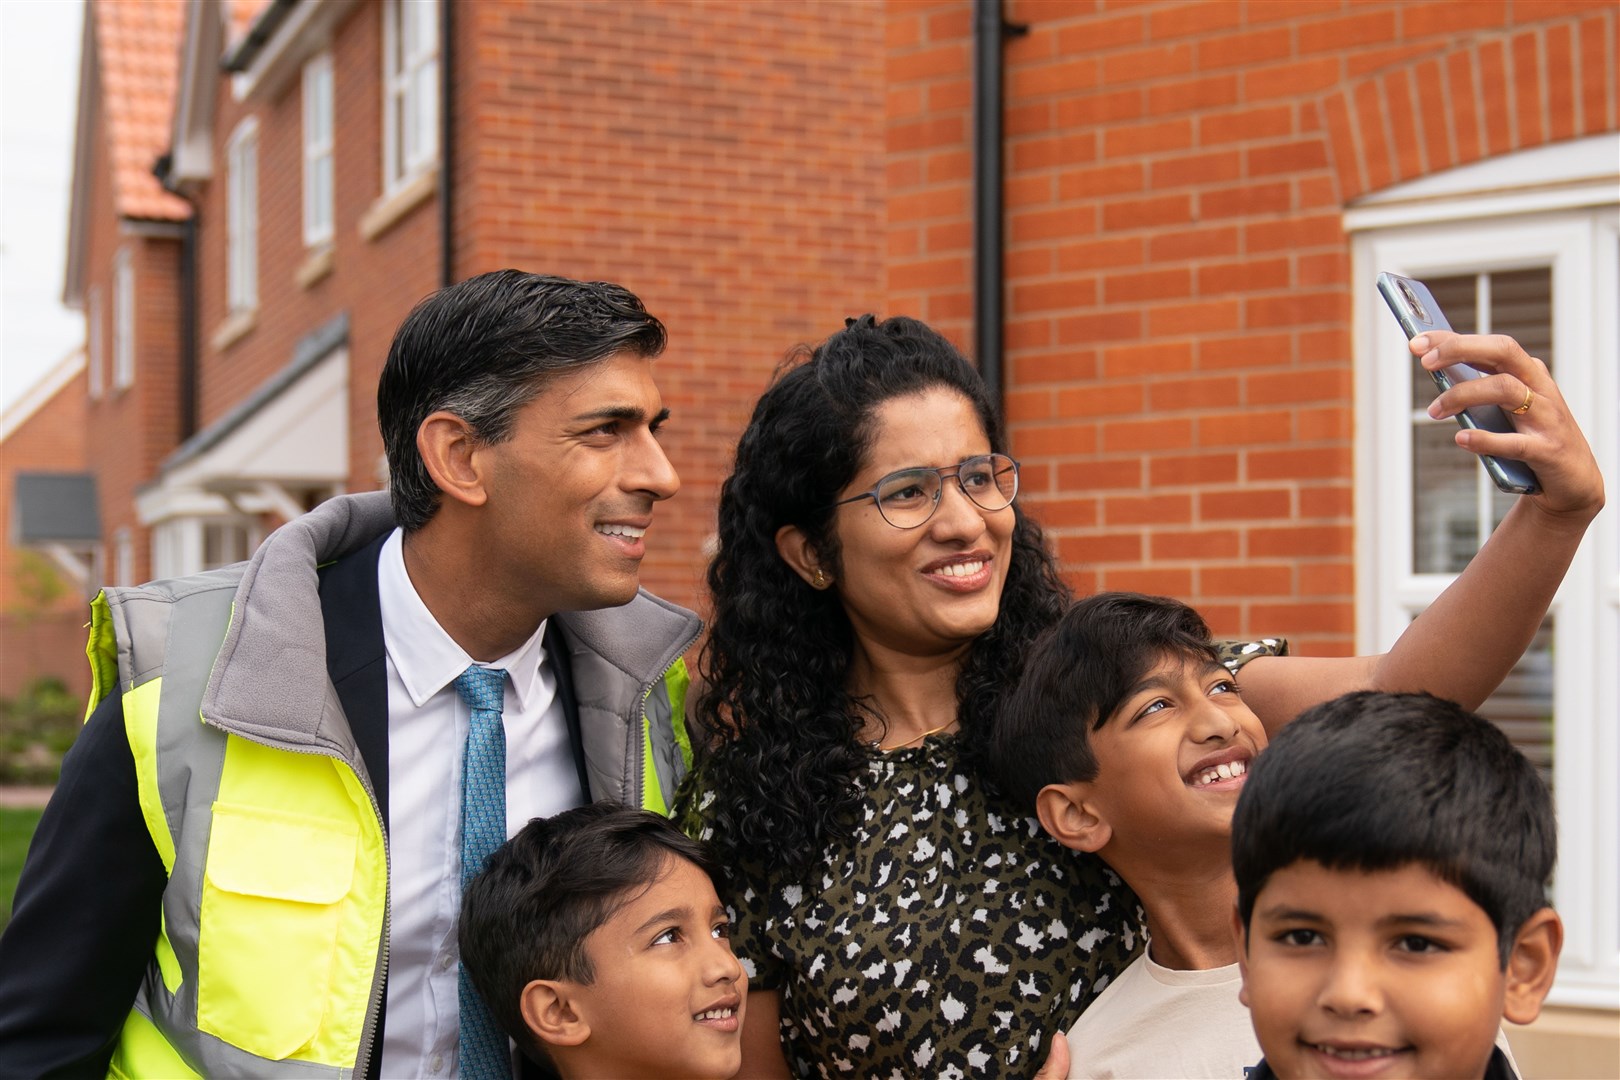 Prime Minister Rishi Sunak poses for a picture with the Mathew family during a visit to the Taylor Wimpey Heather Gardens housing development in Norwich (Joe Giddens/PA)